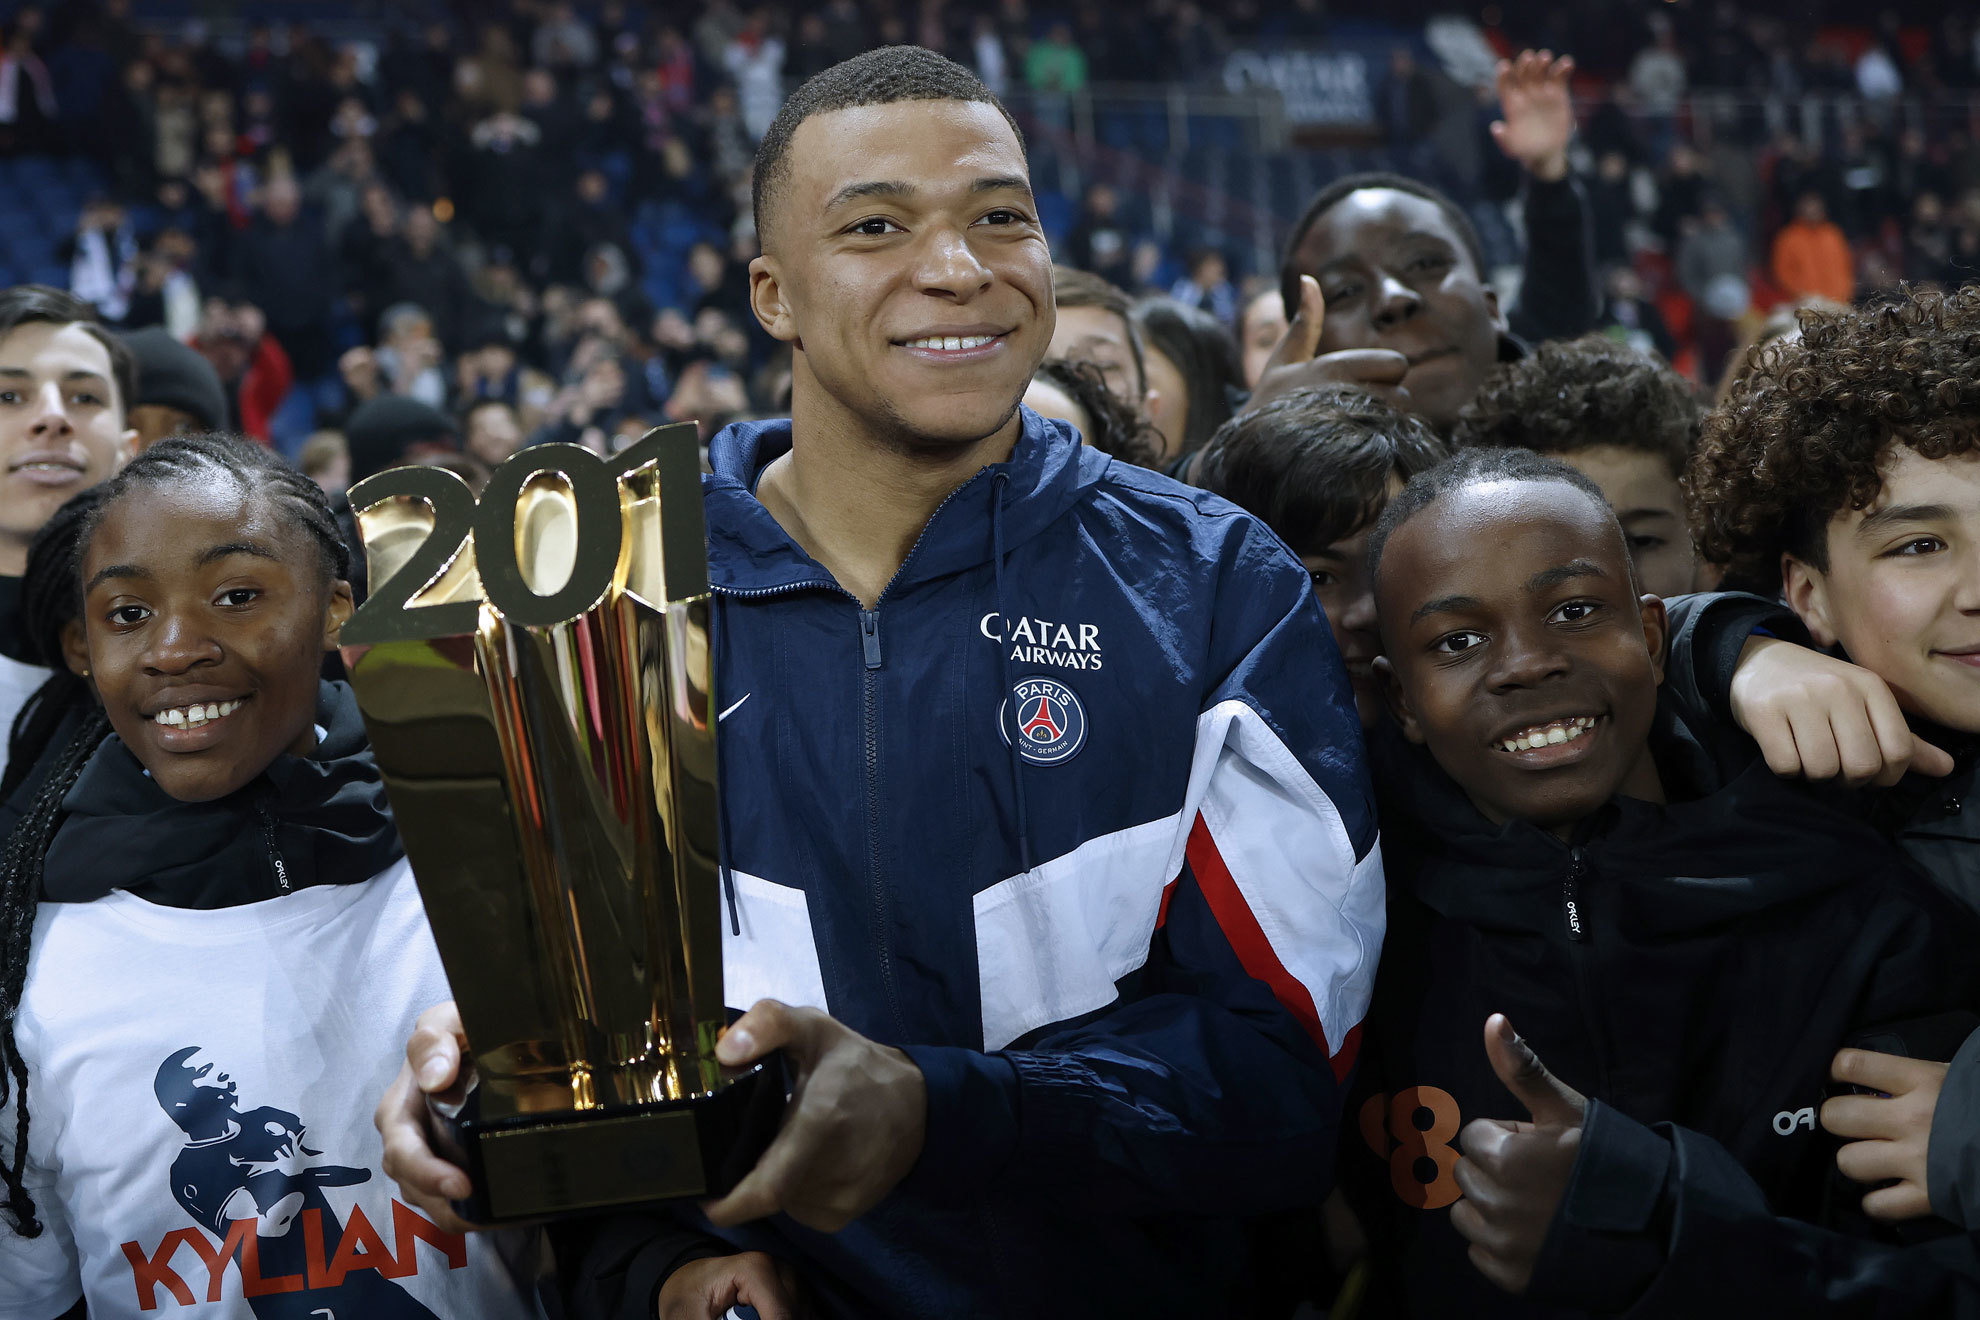 Mbappe overtakes Cavani to become PSG's all-time top scorer